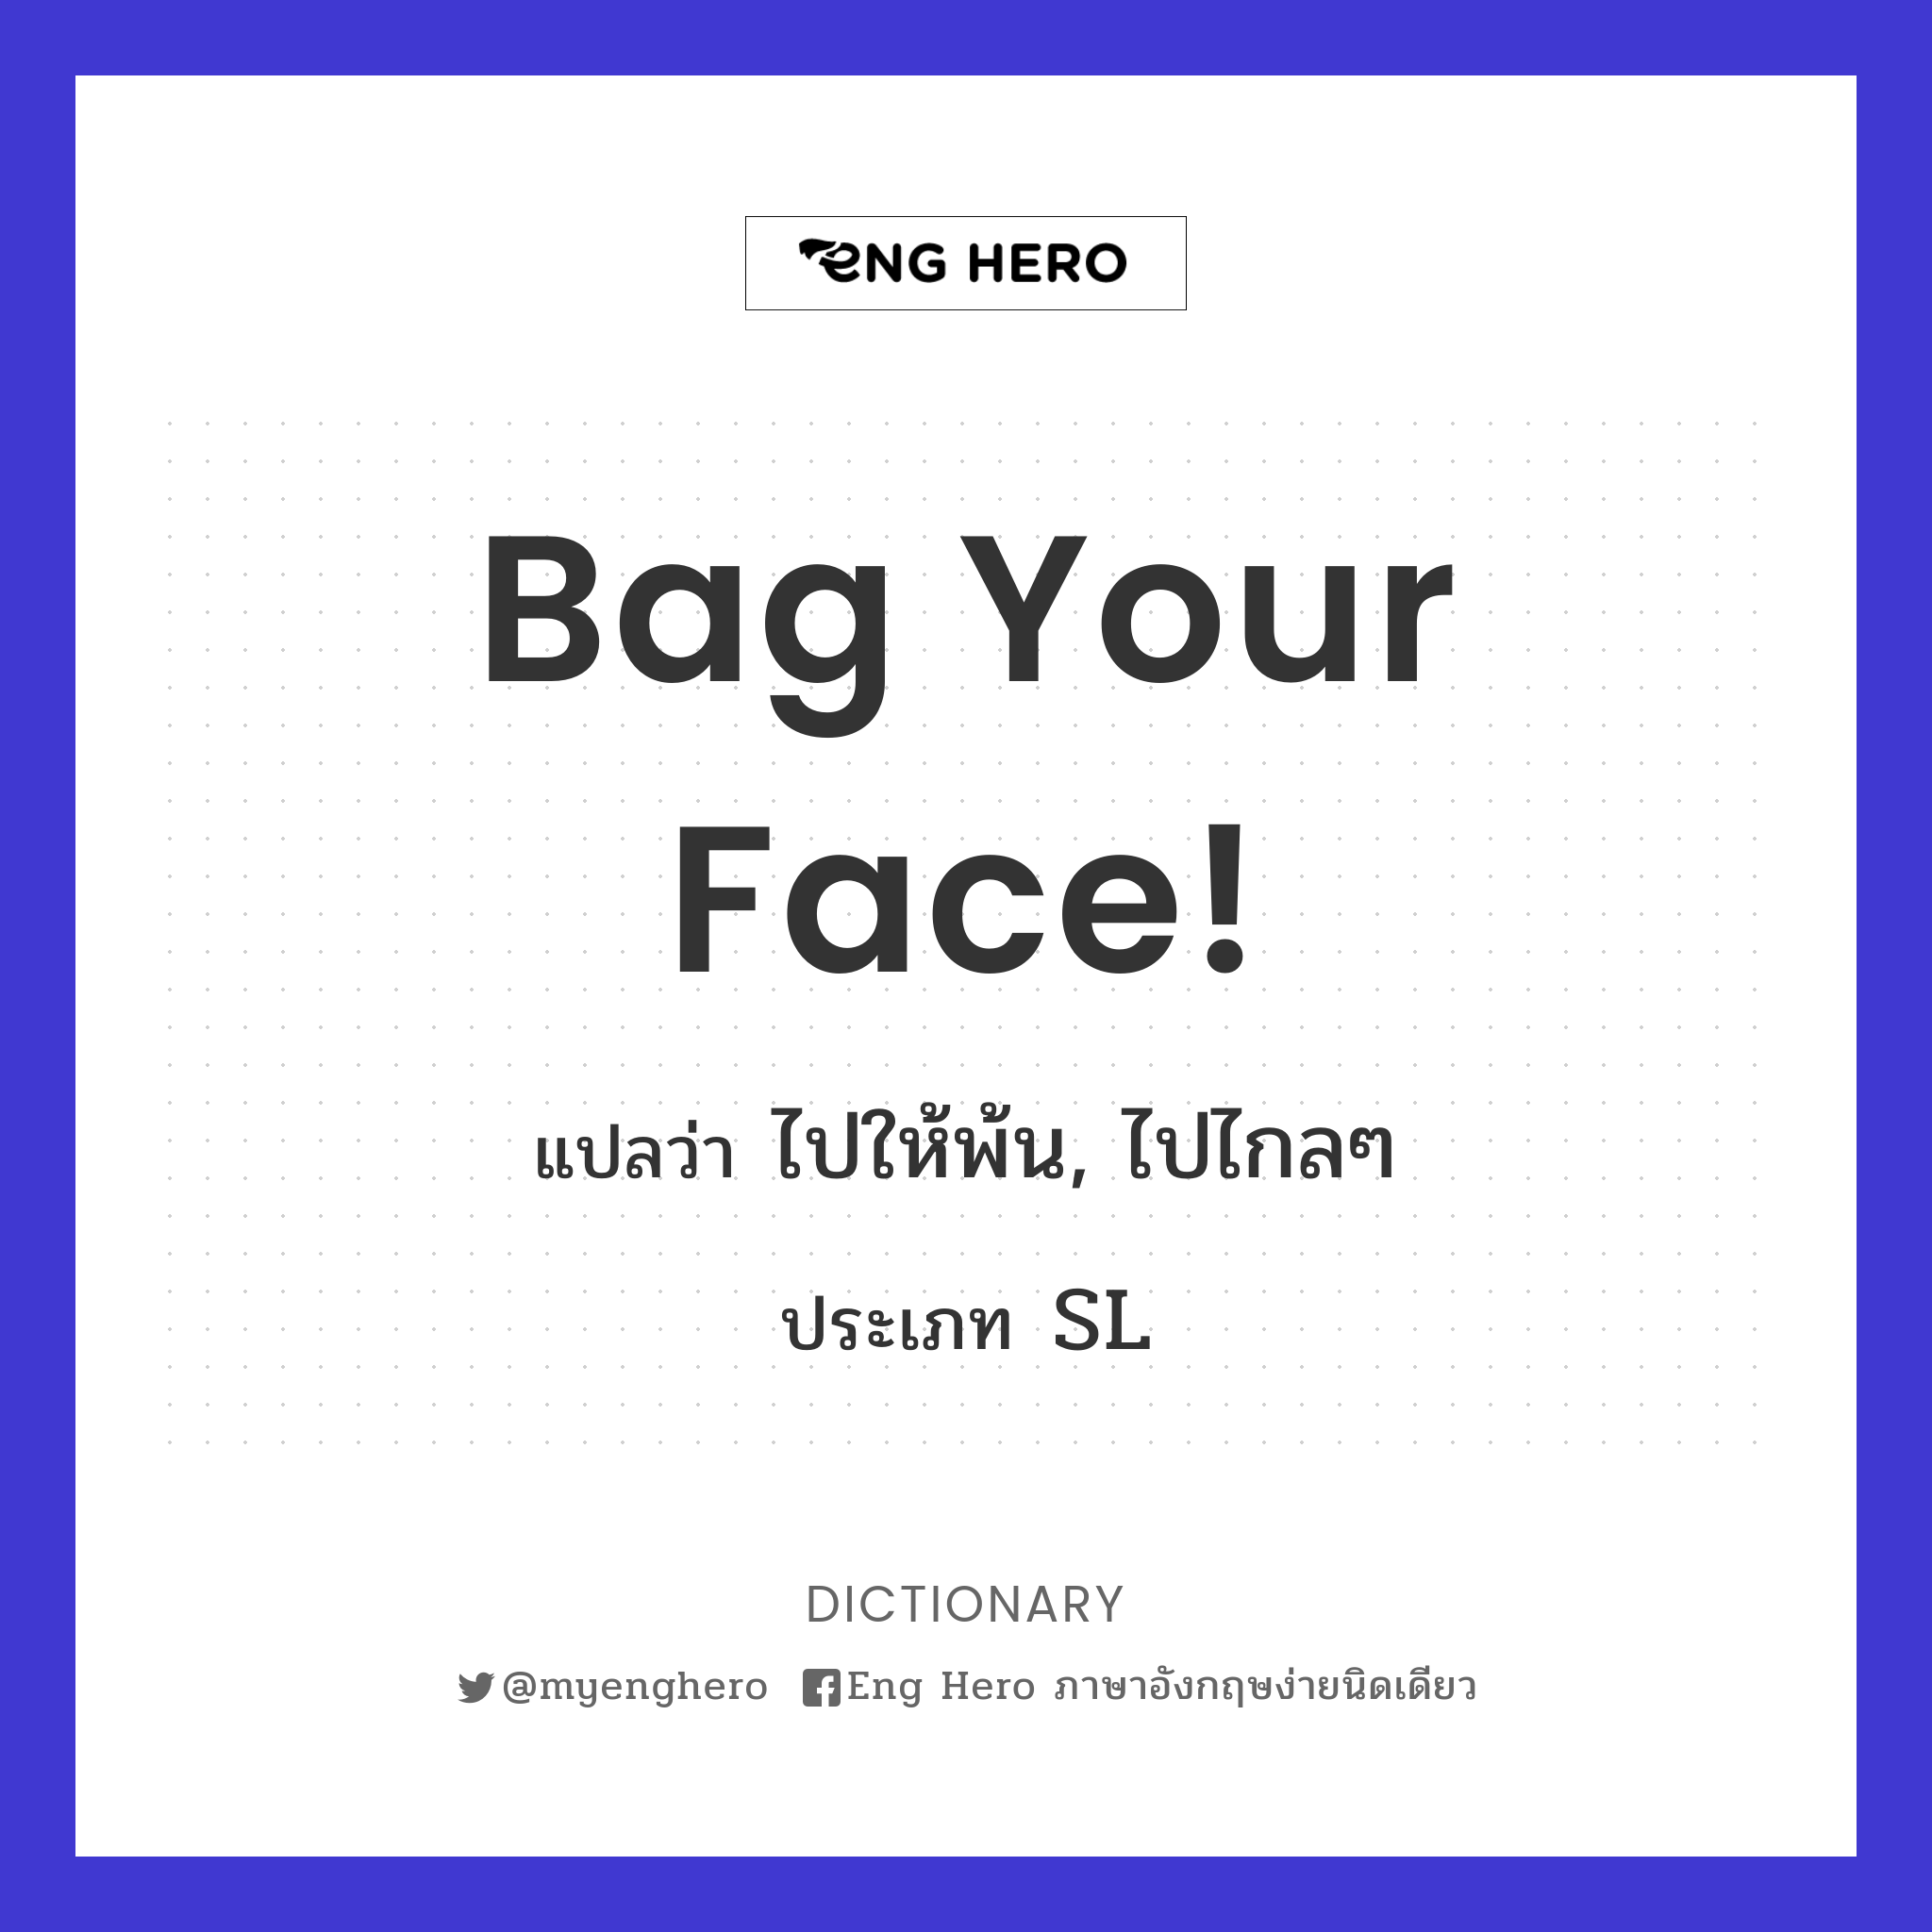 Bag your face!